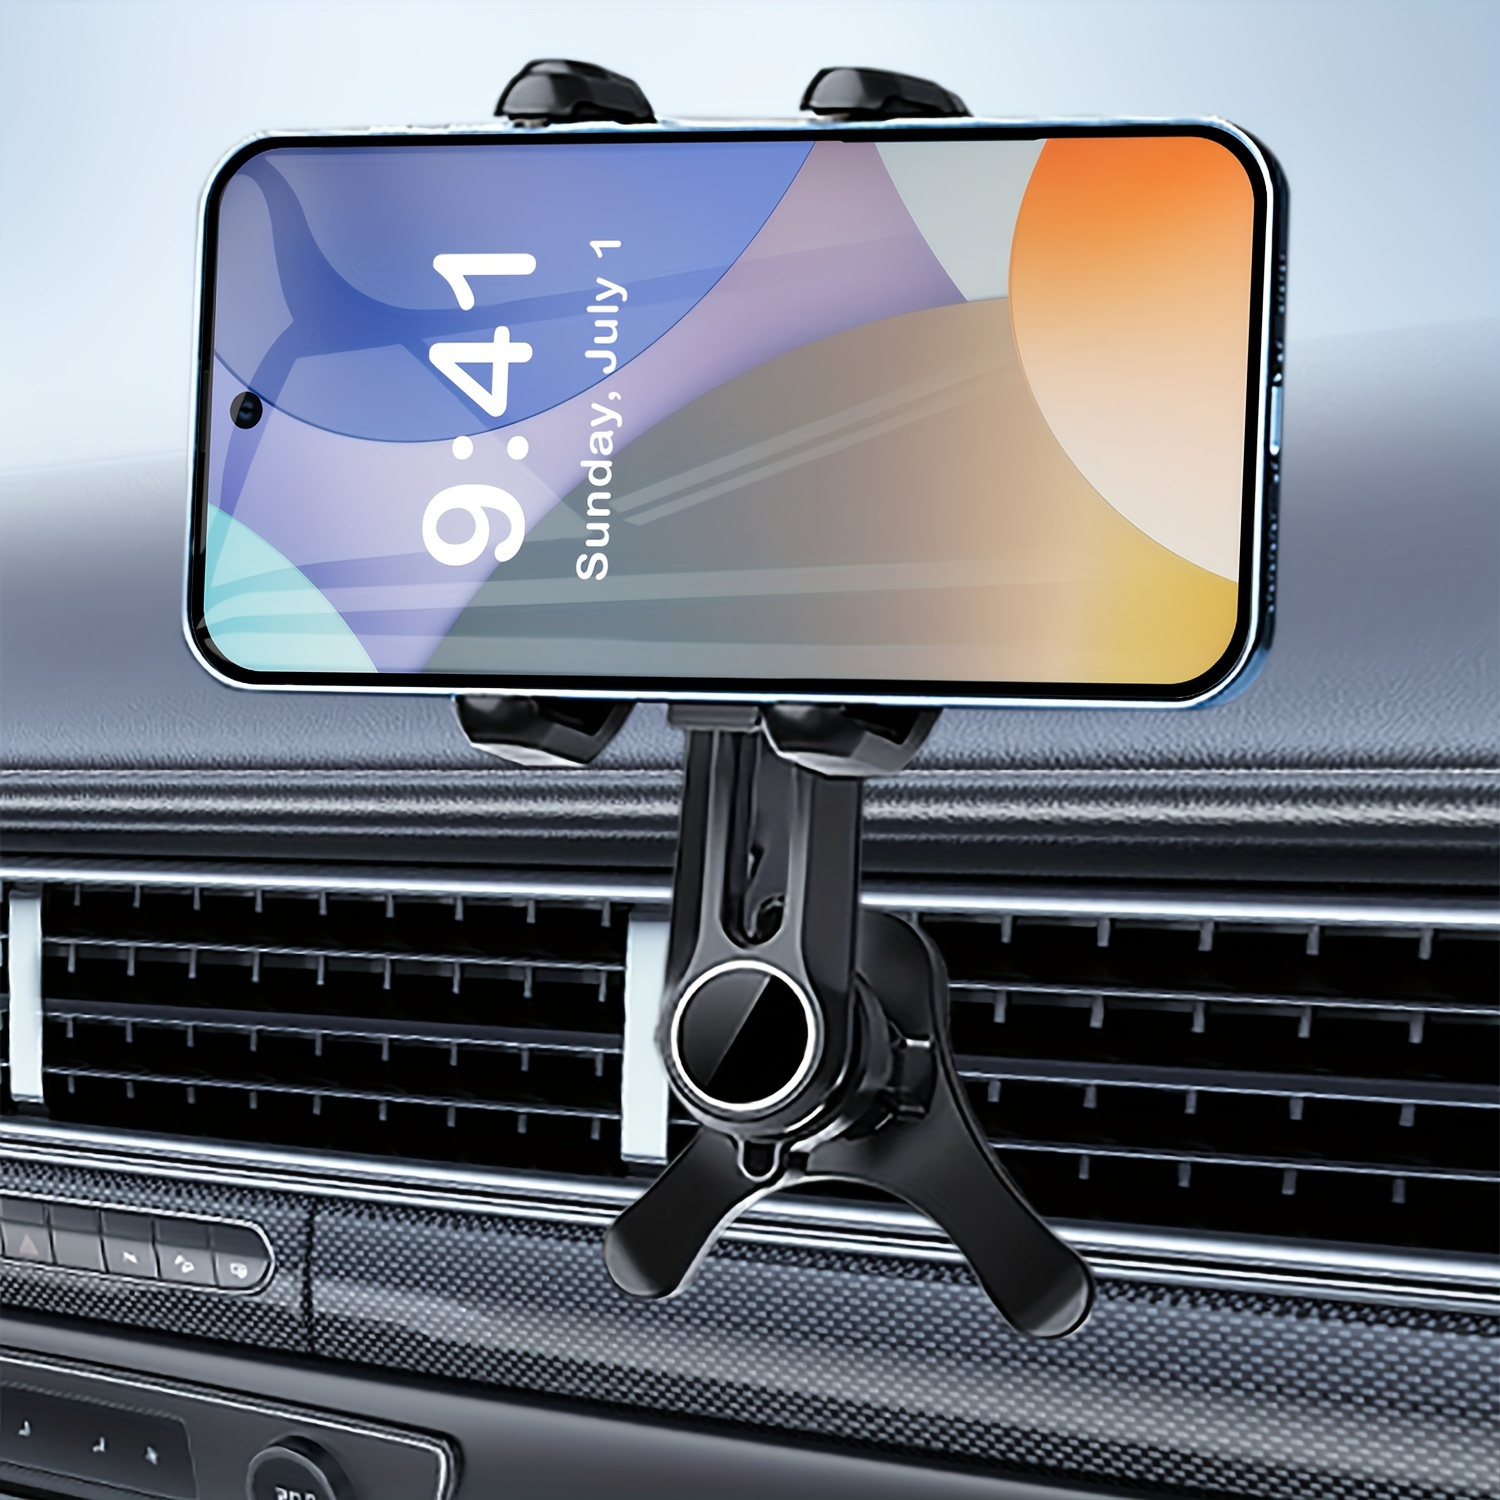 

Car Phone Holder For Air Vent, New Air Outlet Phone Mount With Extention Rod, Cell Phone Holder For Car Never Blocking Vent, Compatible With Most Smartphones